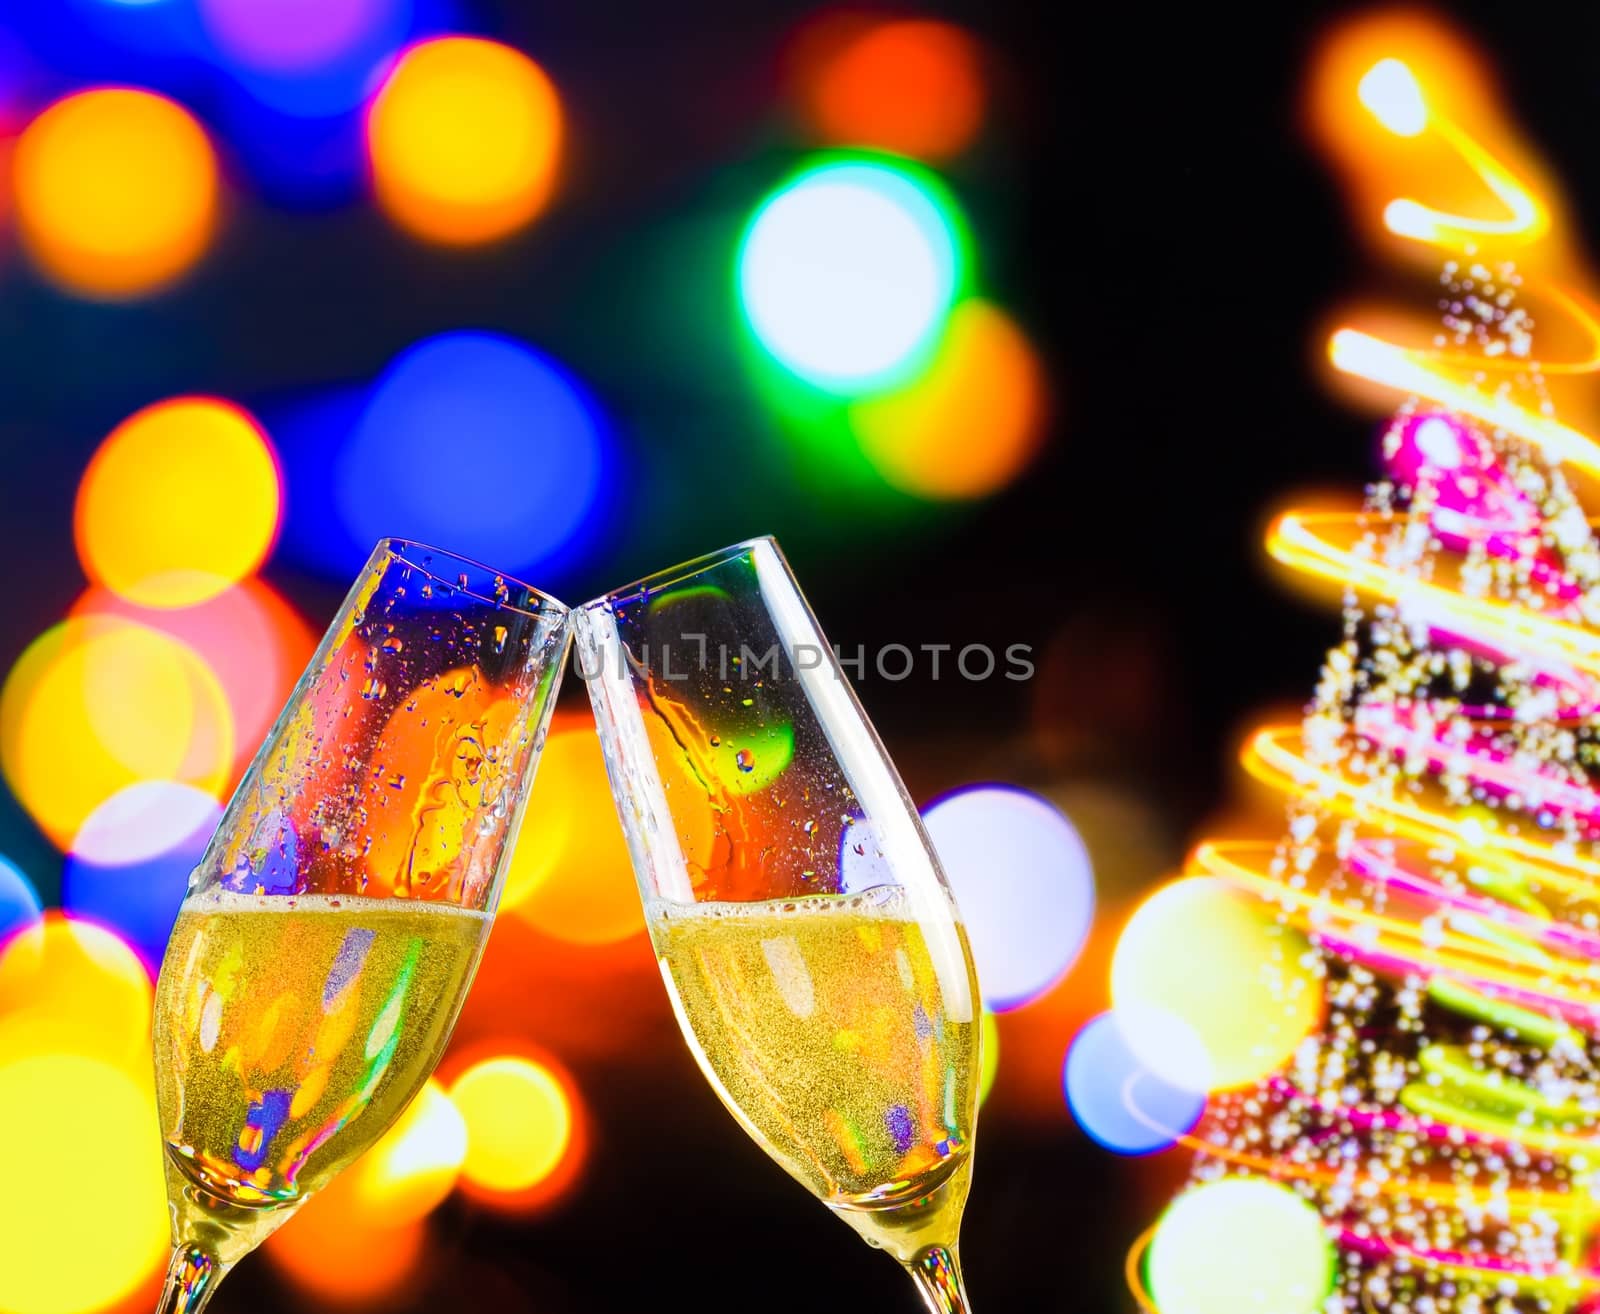 champagne flutes with golden bubbles on christmas lights bokeh decoration background by donfiore